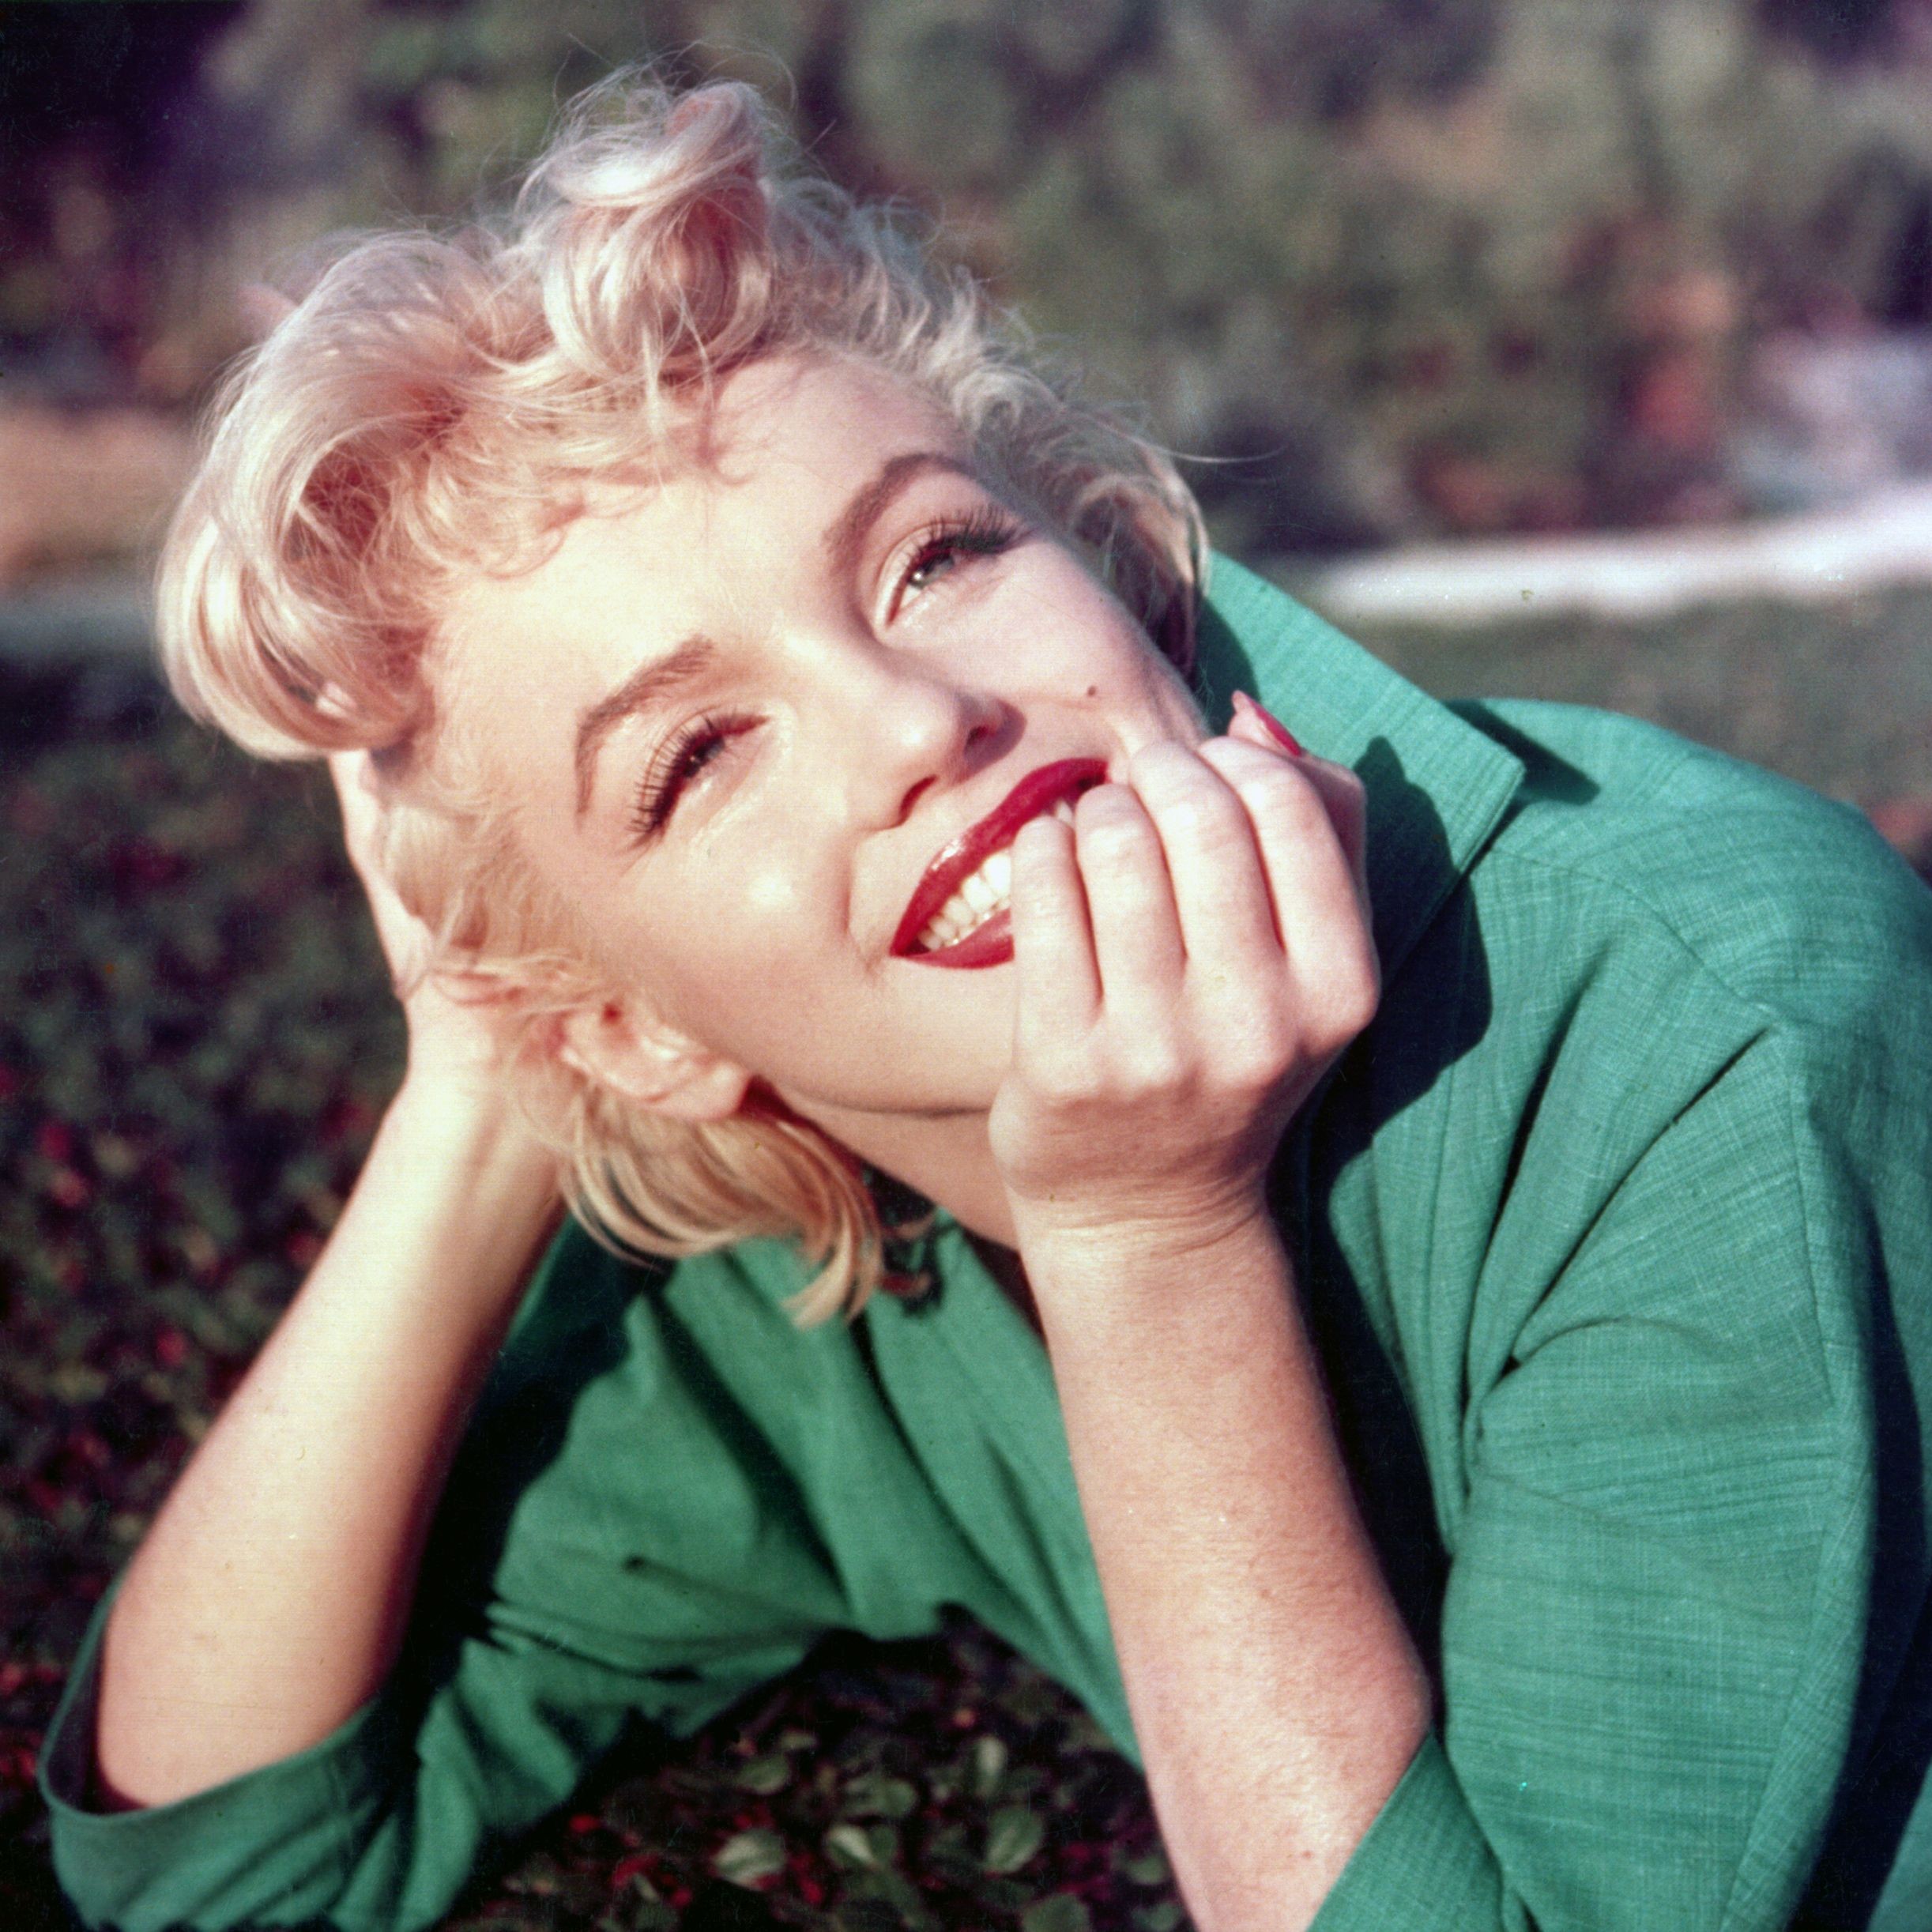 Marilyn Monroe - The Woman Behind the Brand